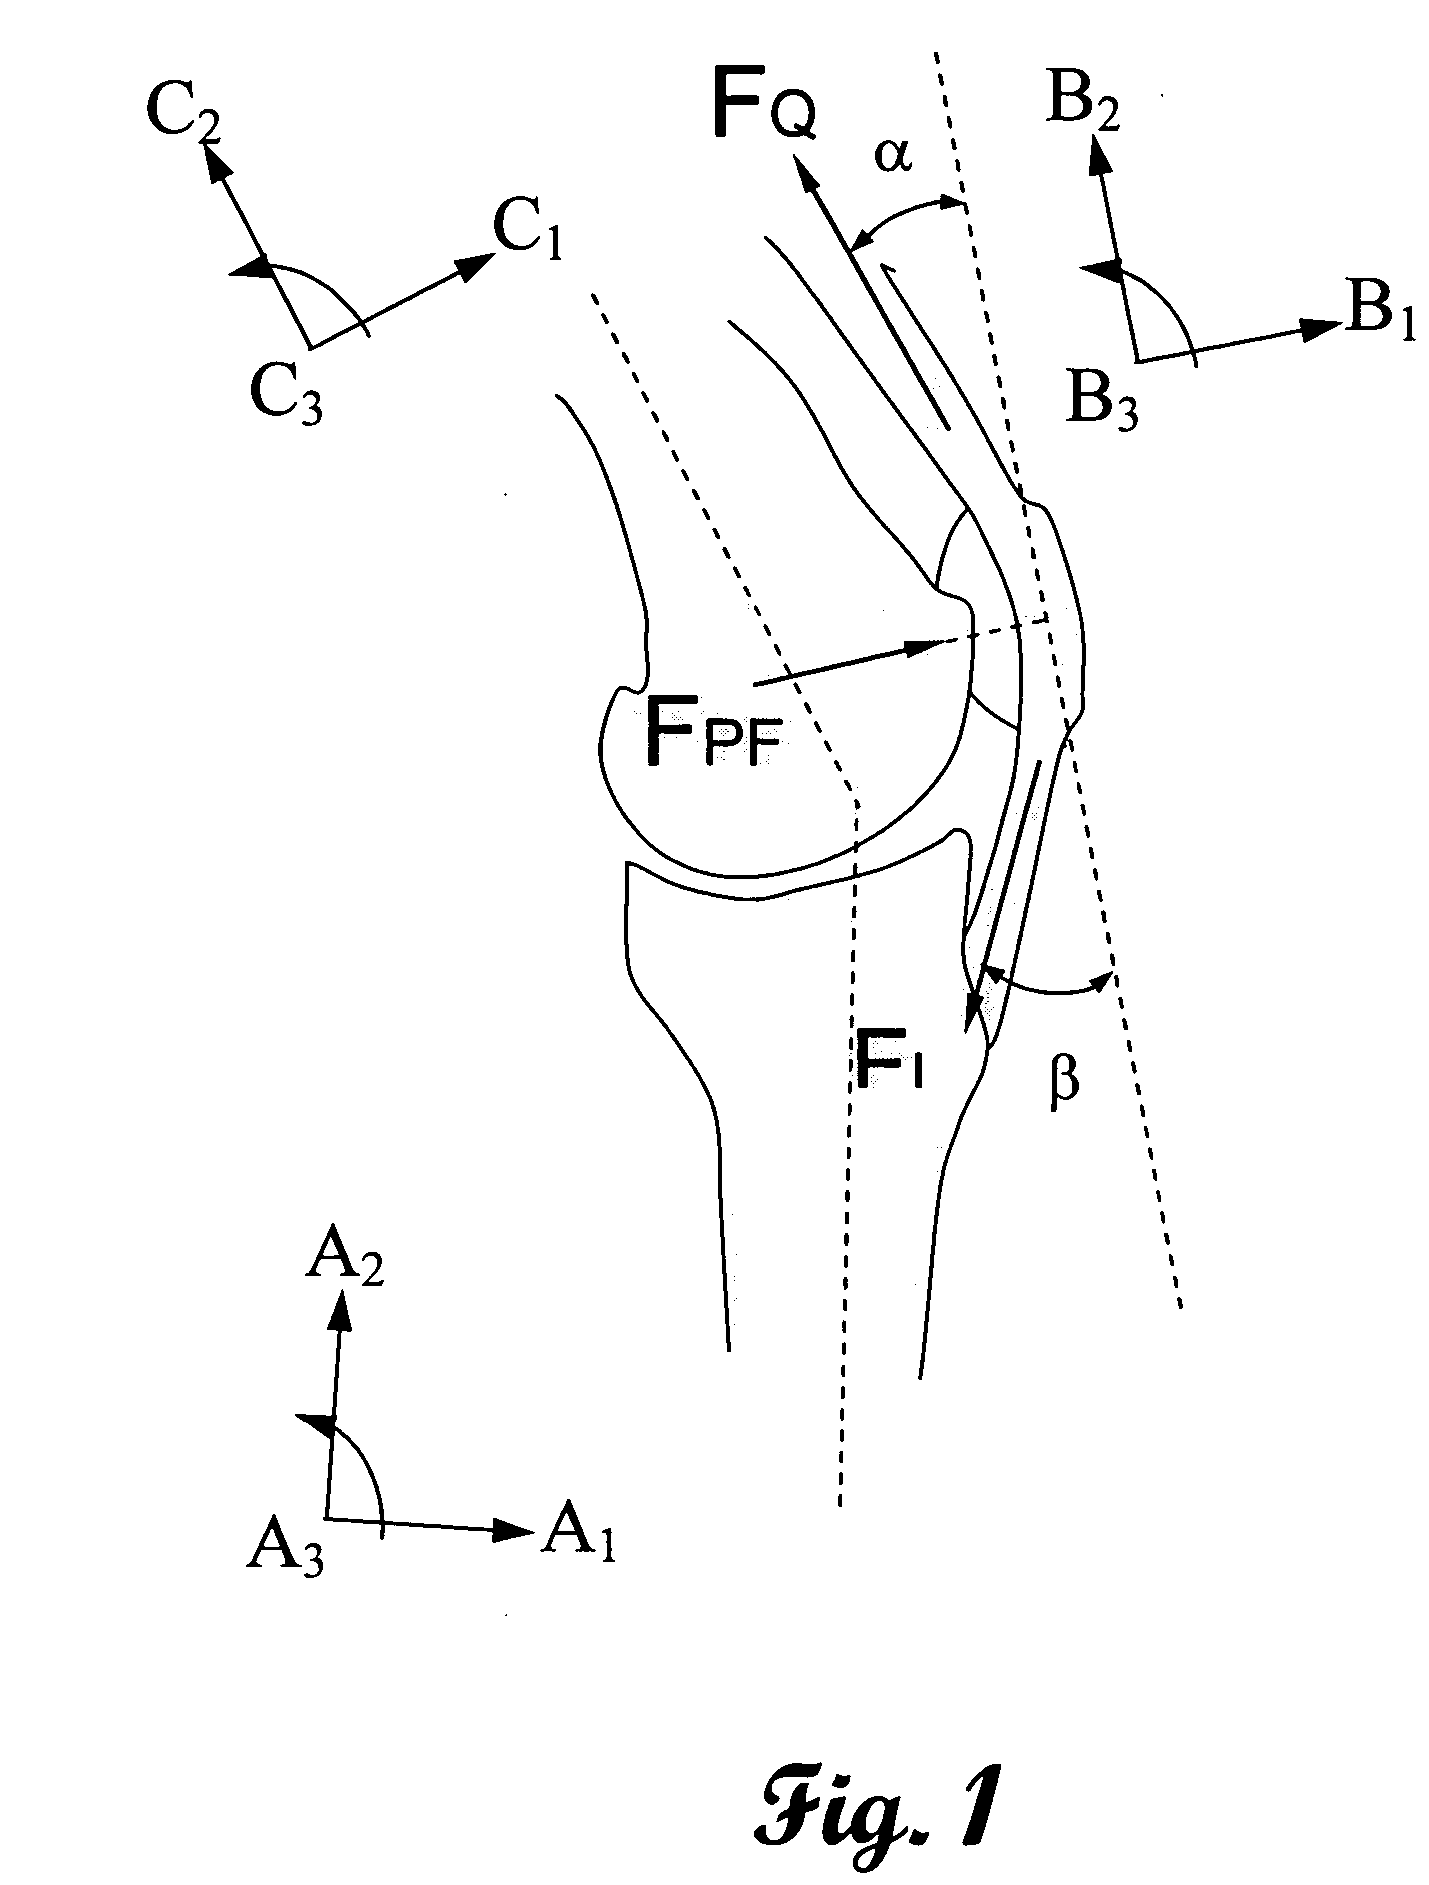 In-vivo orthopedic implant diagnostic device for sensing load, wear, and infection